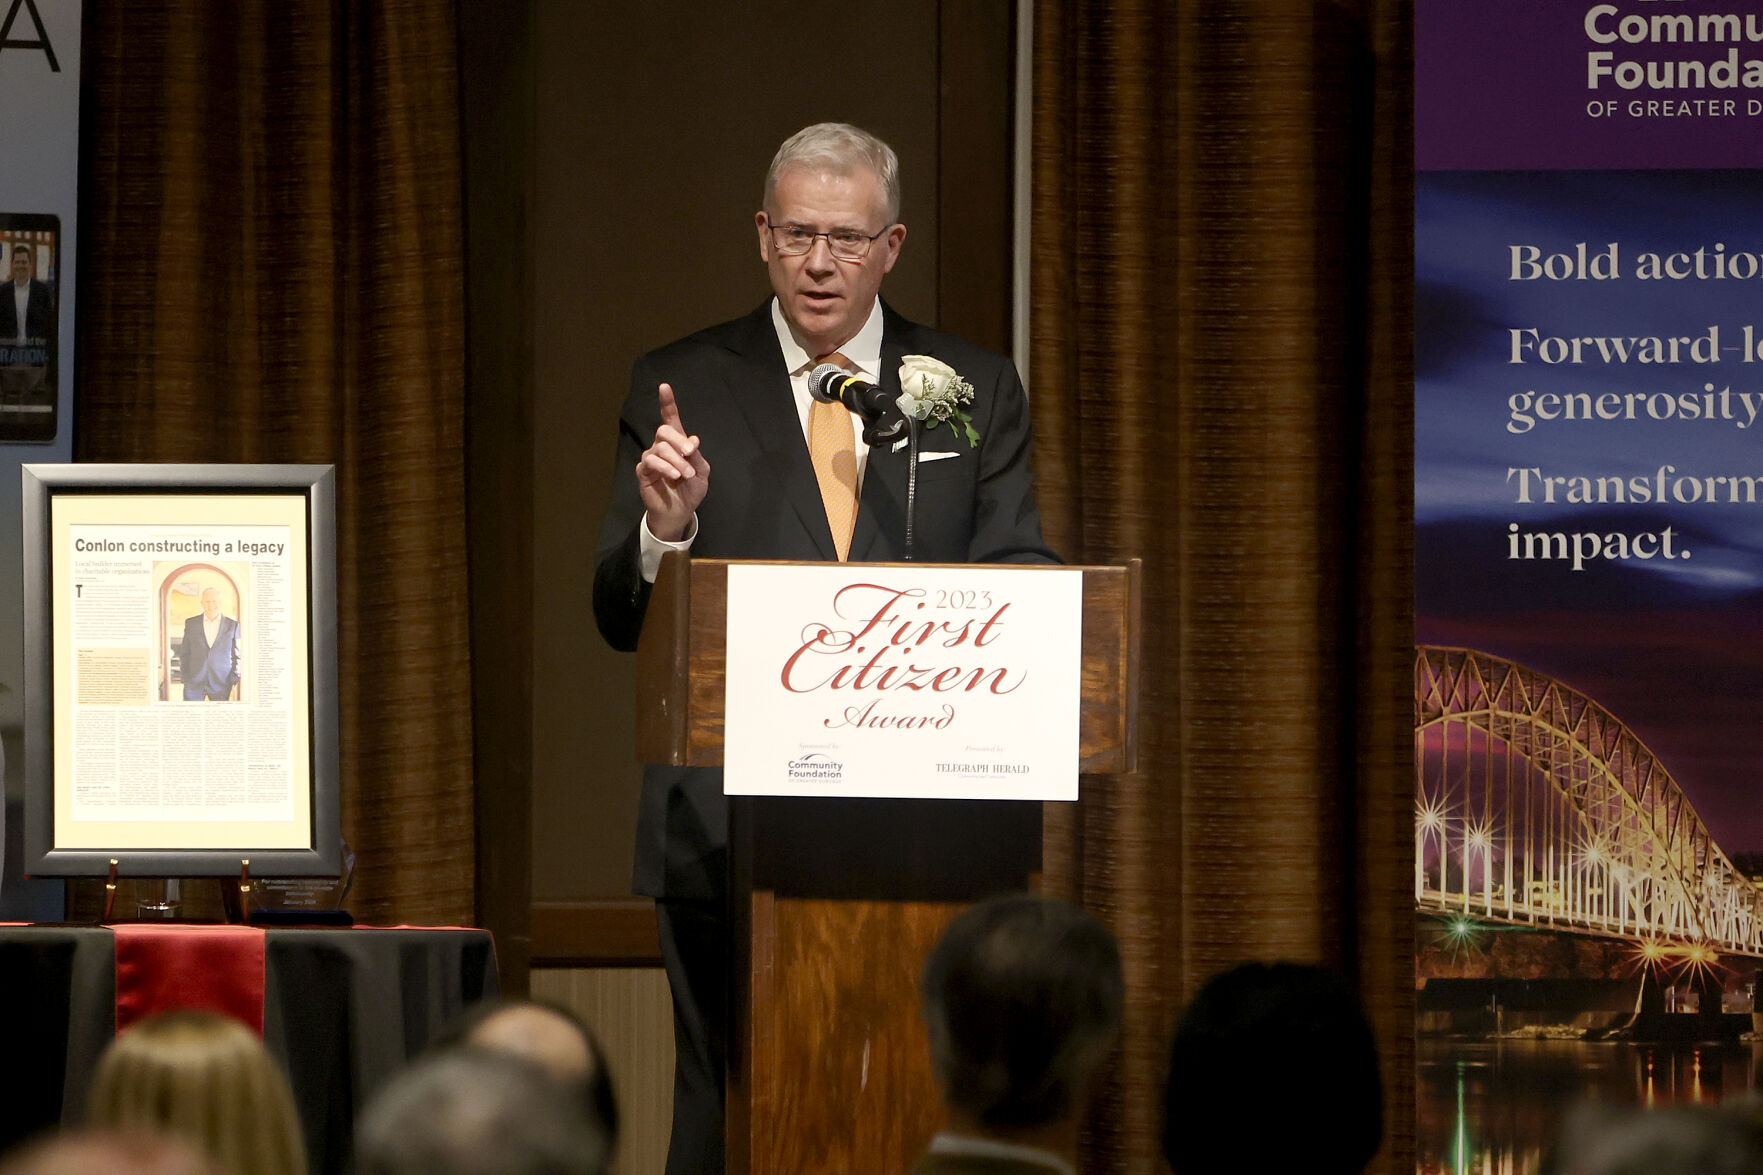 Conlon spoke about the many “wonderful people” he’s met throughout the years and how that inspired him toward volunteerism and philanthropy.    PHOTO CREDIT: Dave Kettering